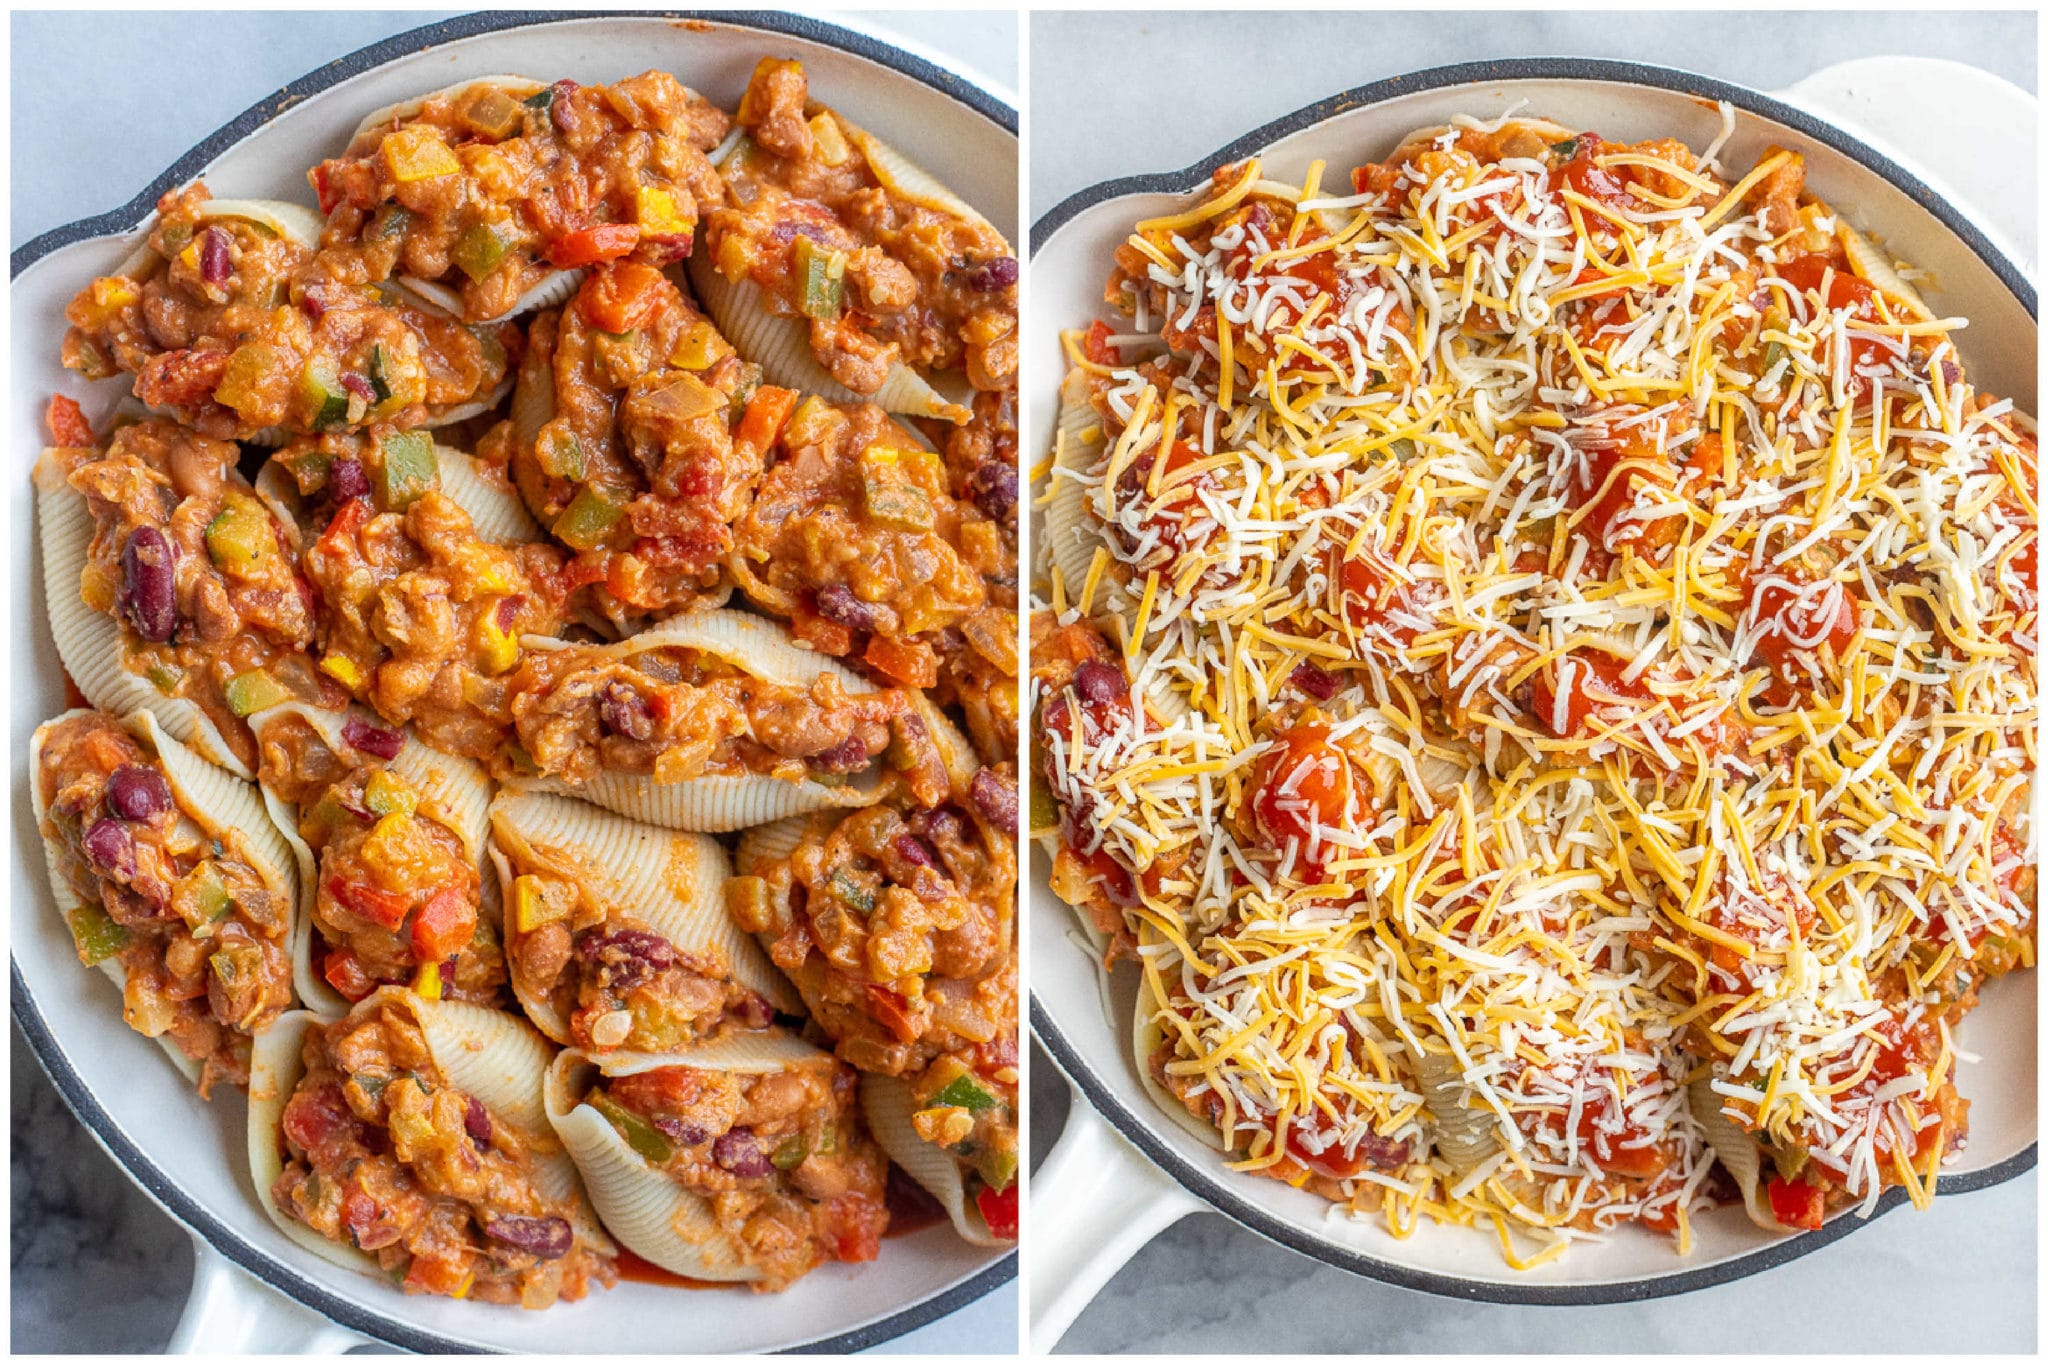 showing how to make these filling chili cheese stuffed shells